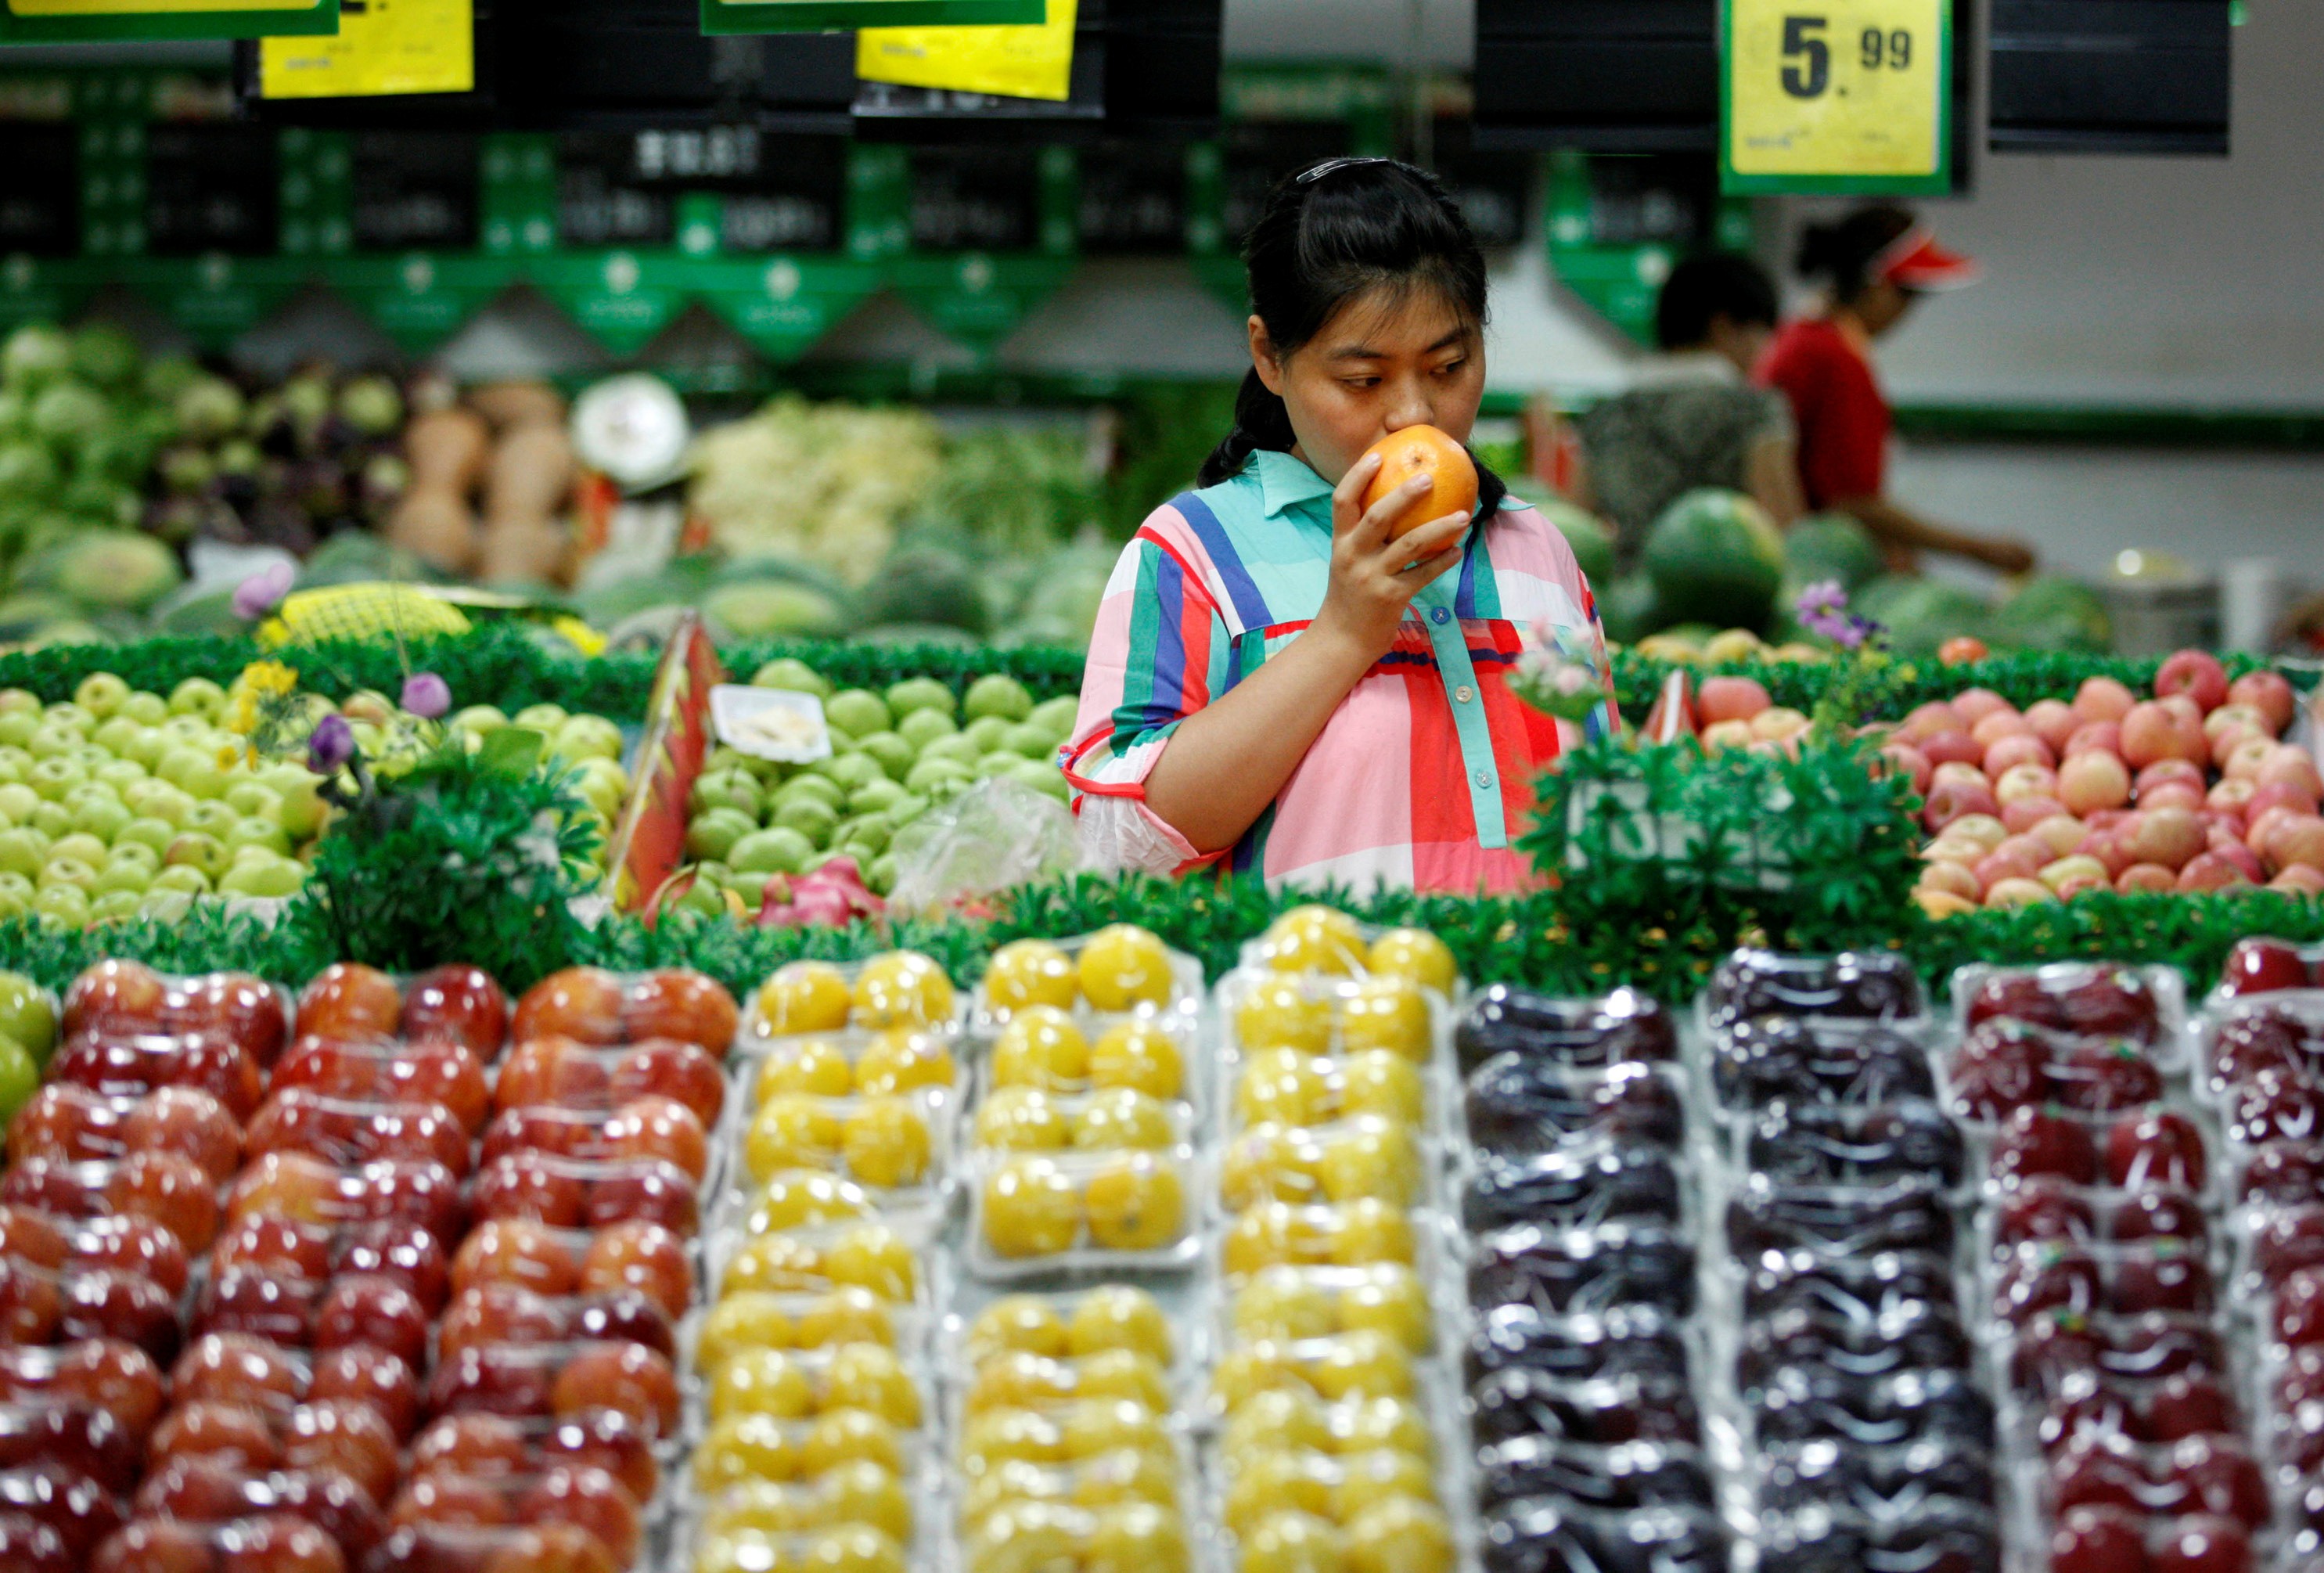 A woman chooses fruit at a supermarket in Huaibei, in China’s Anhui province. China, already at the upper range of middle-income economies, is expected to break into the “high-income” category by 2023. Photo: Reuters